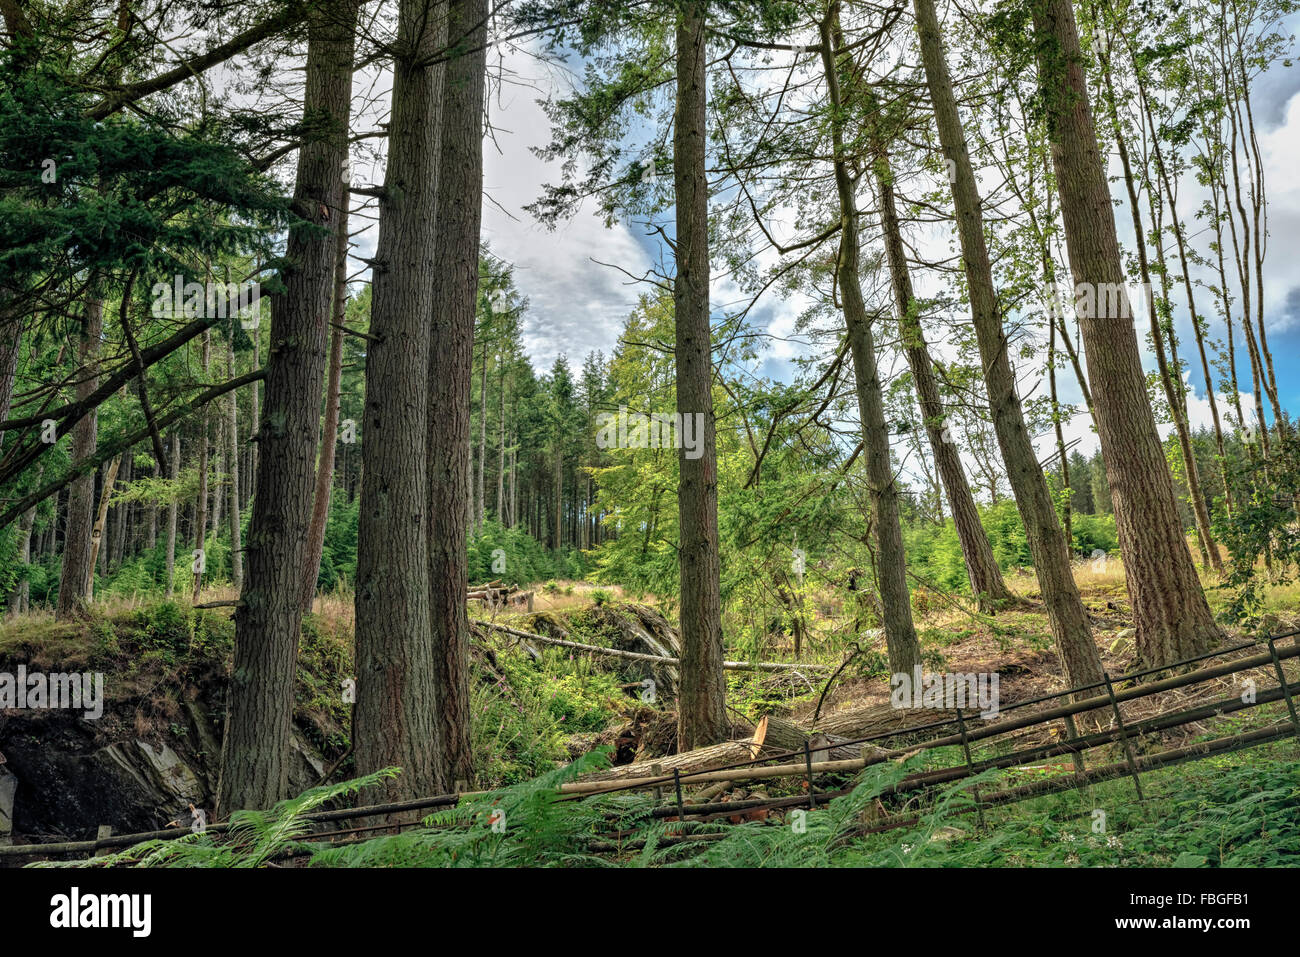 Cut down trees in a pine forest in Mid-Wales UK Stock Photo